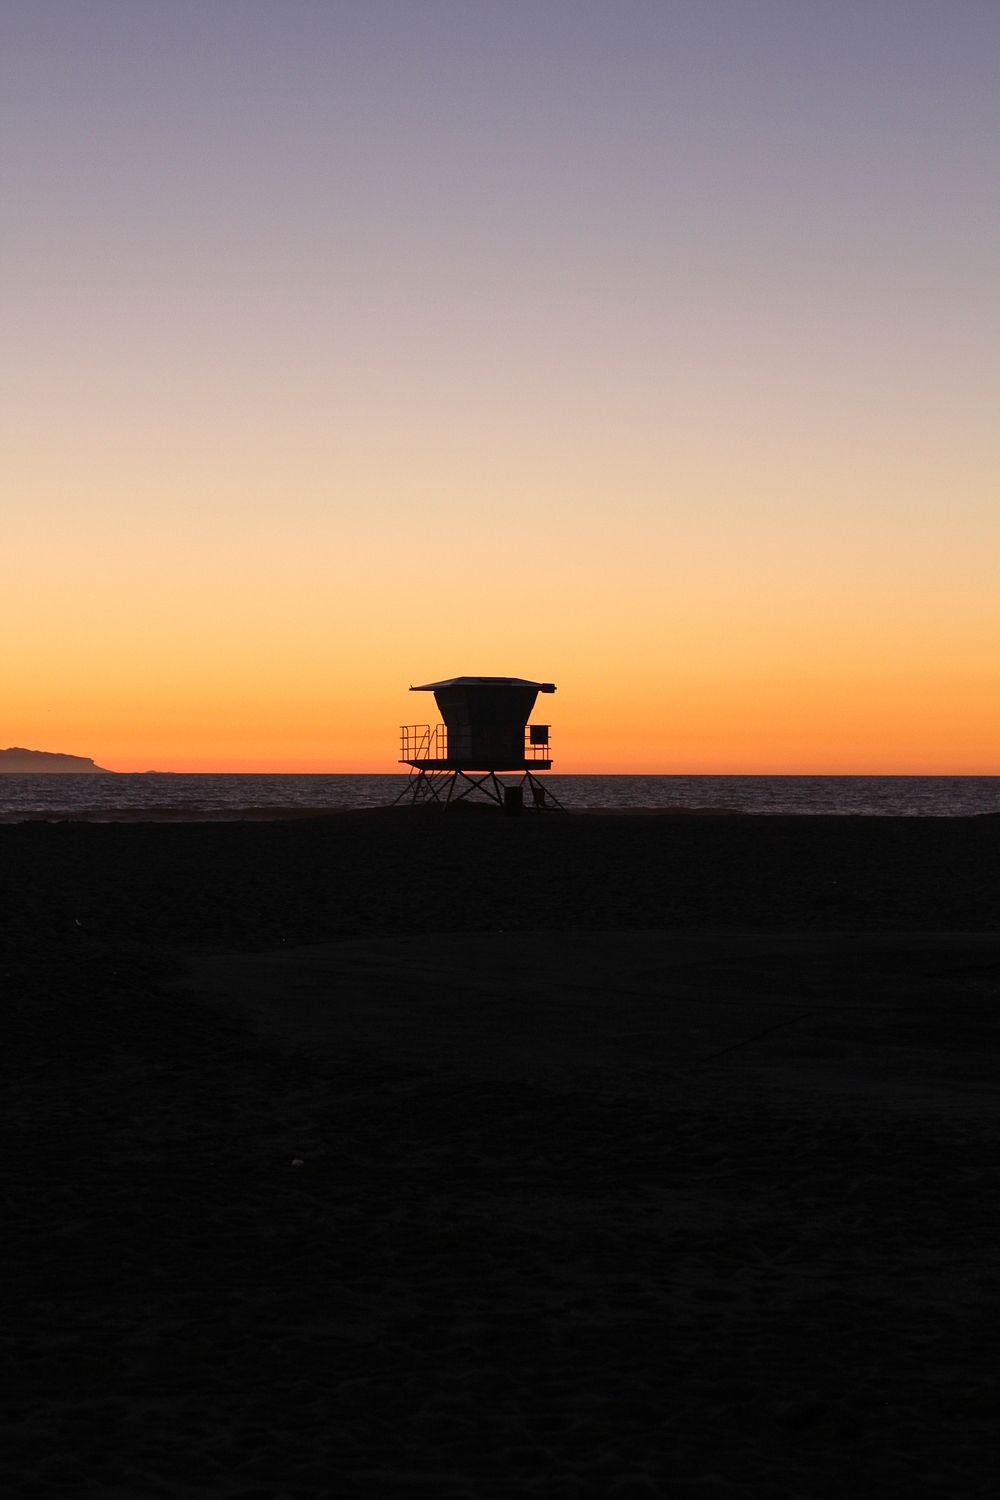 A silhouette of a lifeguard station on a deserted Huntington Beach at sunset. Original public domain image from Wikimedia…